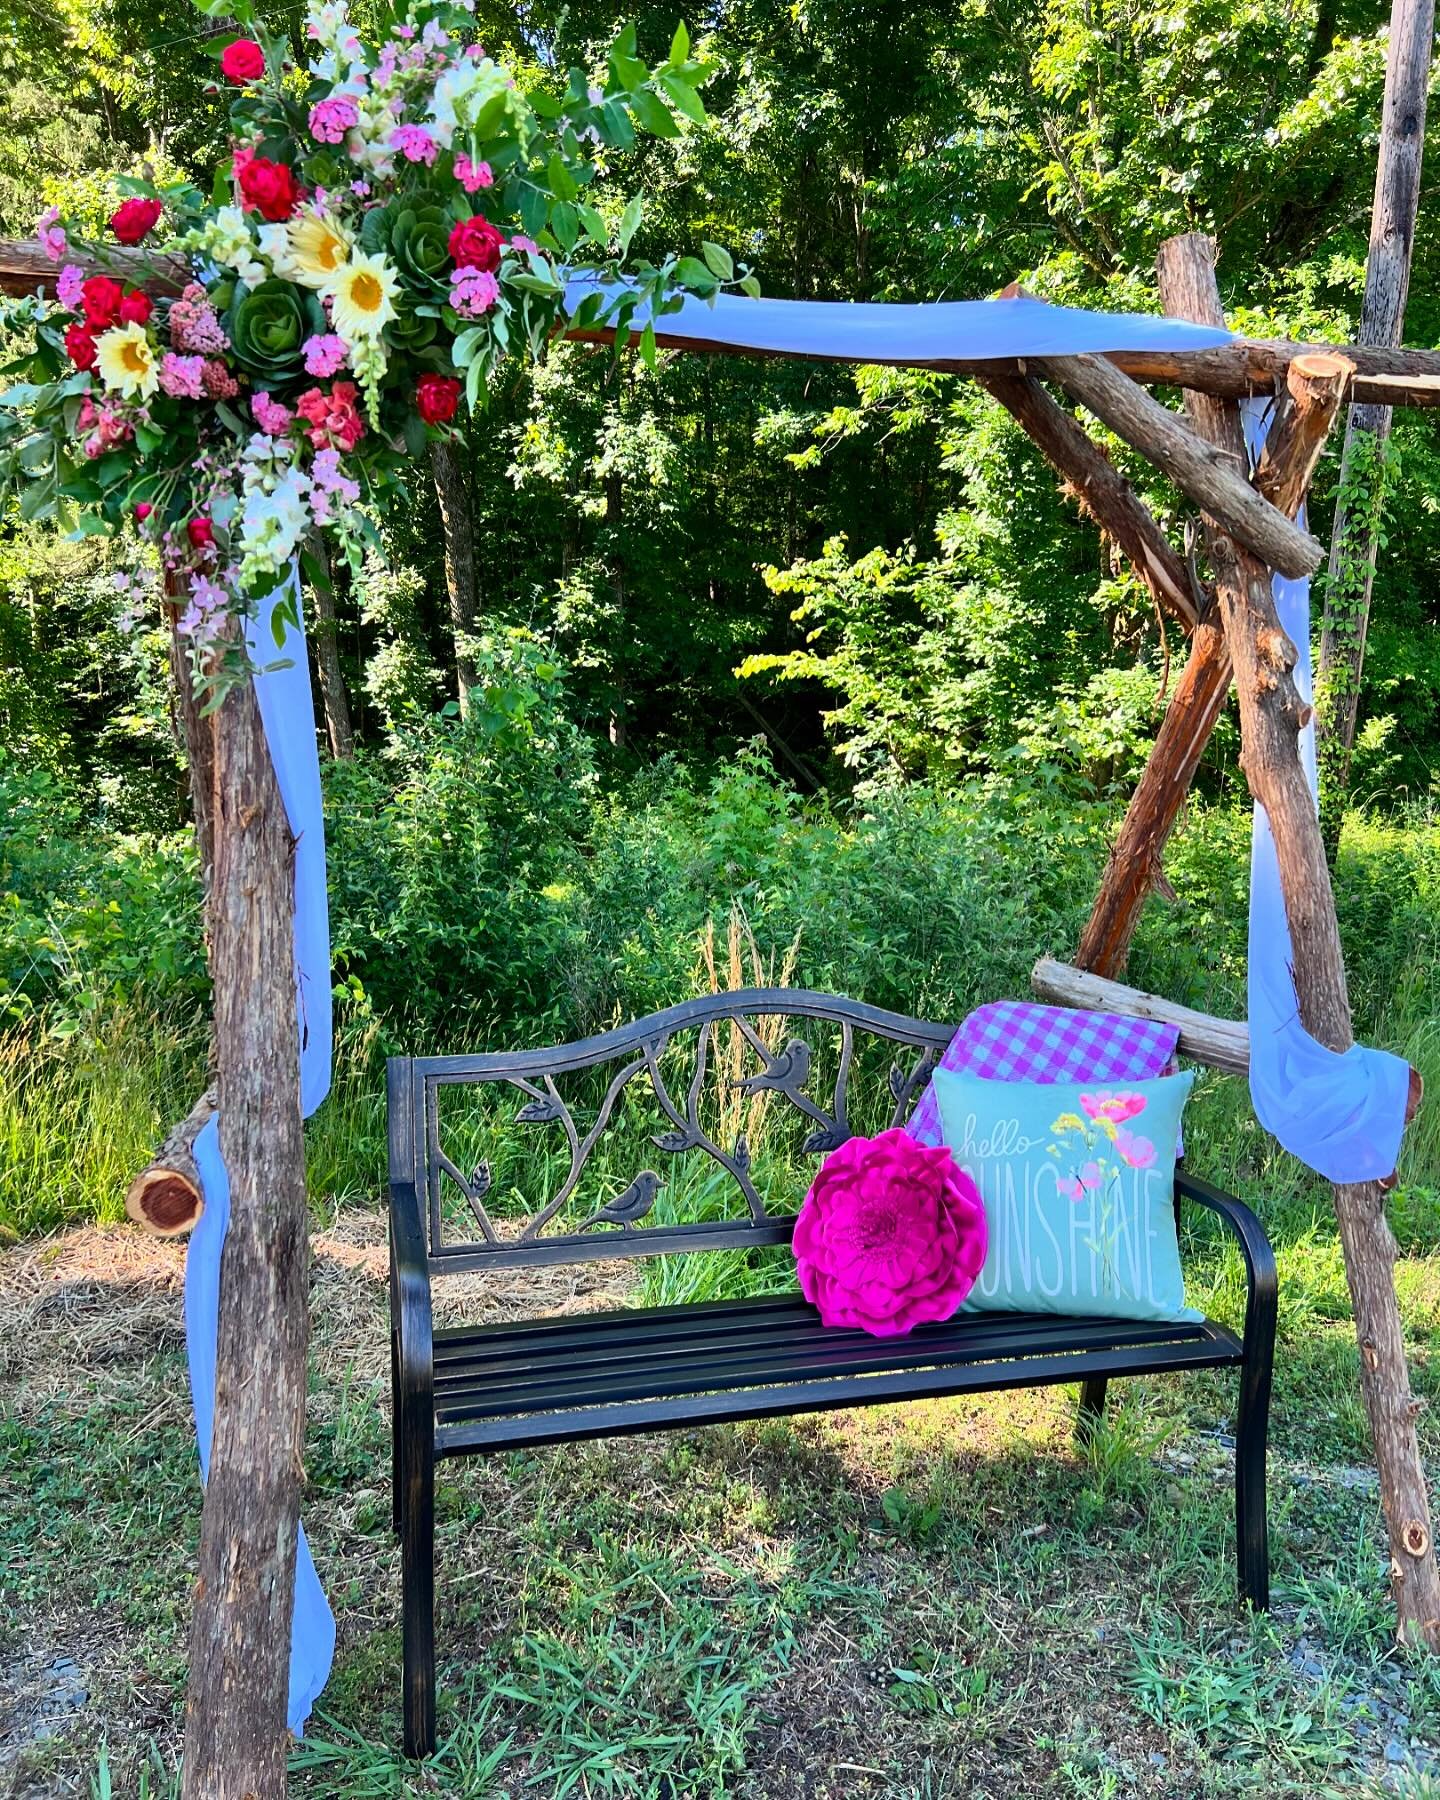 🎉 Surprise photo pop up at our flower stand in Pittsboro today and tomorrow. Come take a picture with (or for) your Mom! Bouquets available while they last. 📸#callyourmom #photospot #selfiespot #ncflowers #pittsboronc #chathamcountync